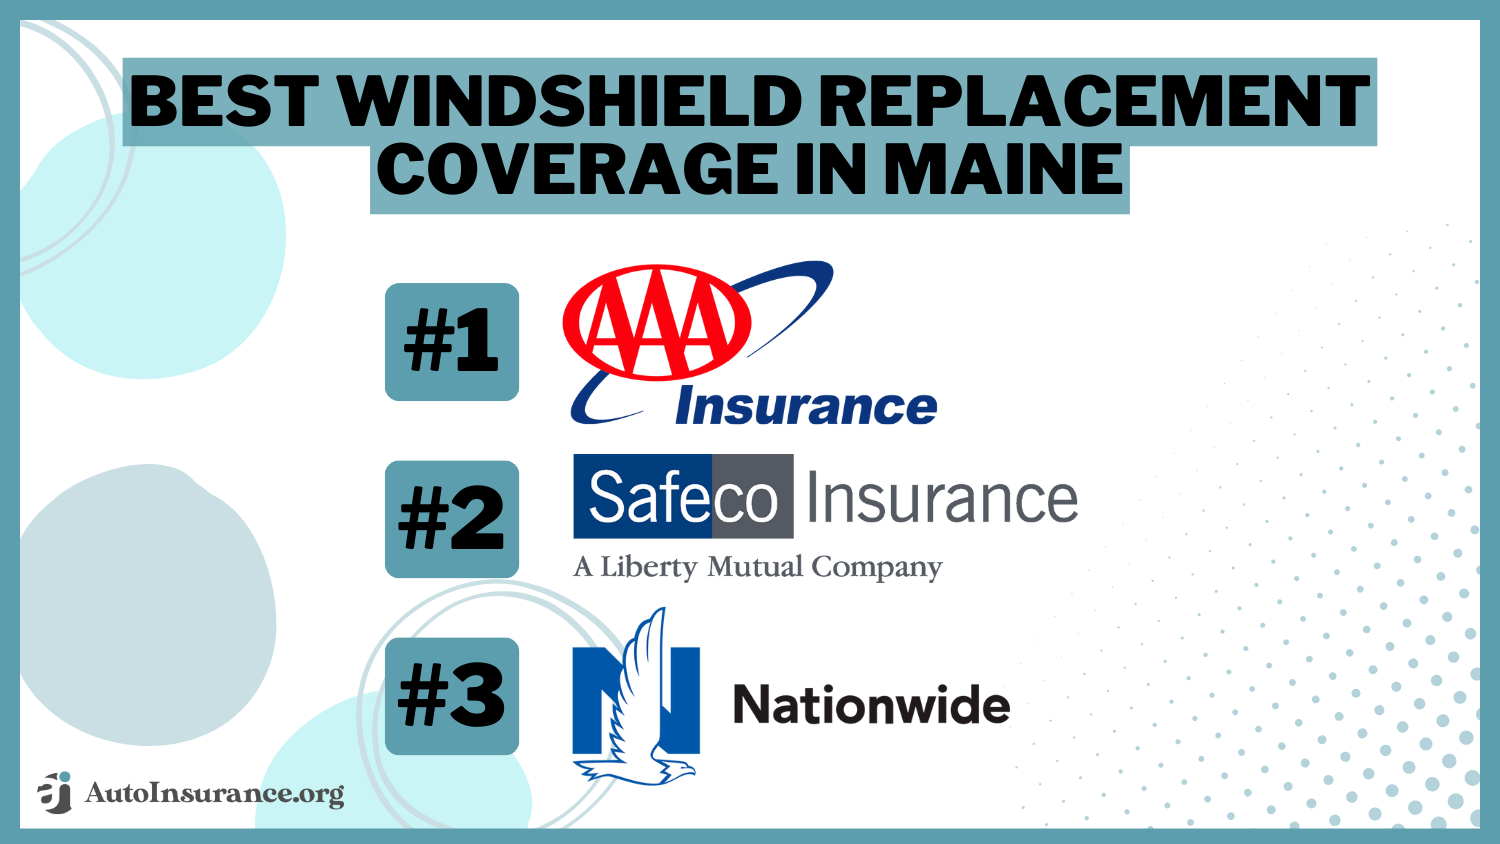 Best Windshield Replacement Coverage in Maine: AAA, Safeco, and Nationwide